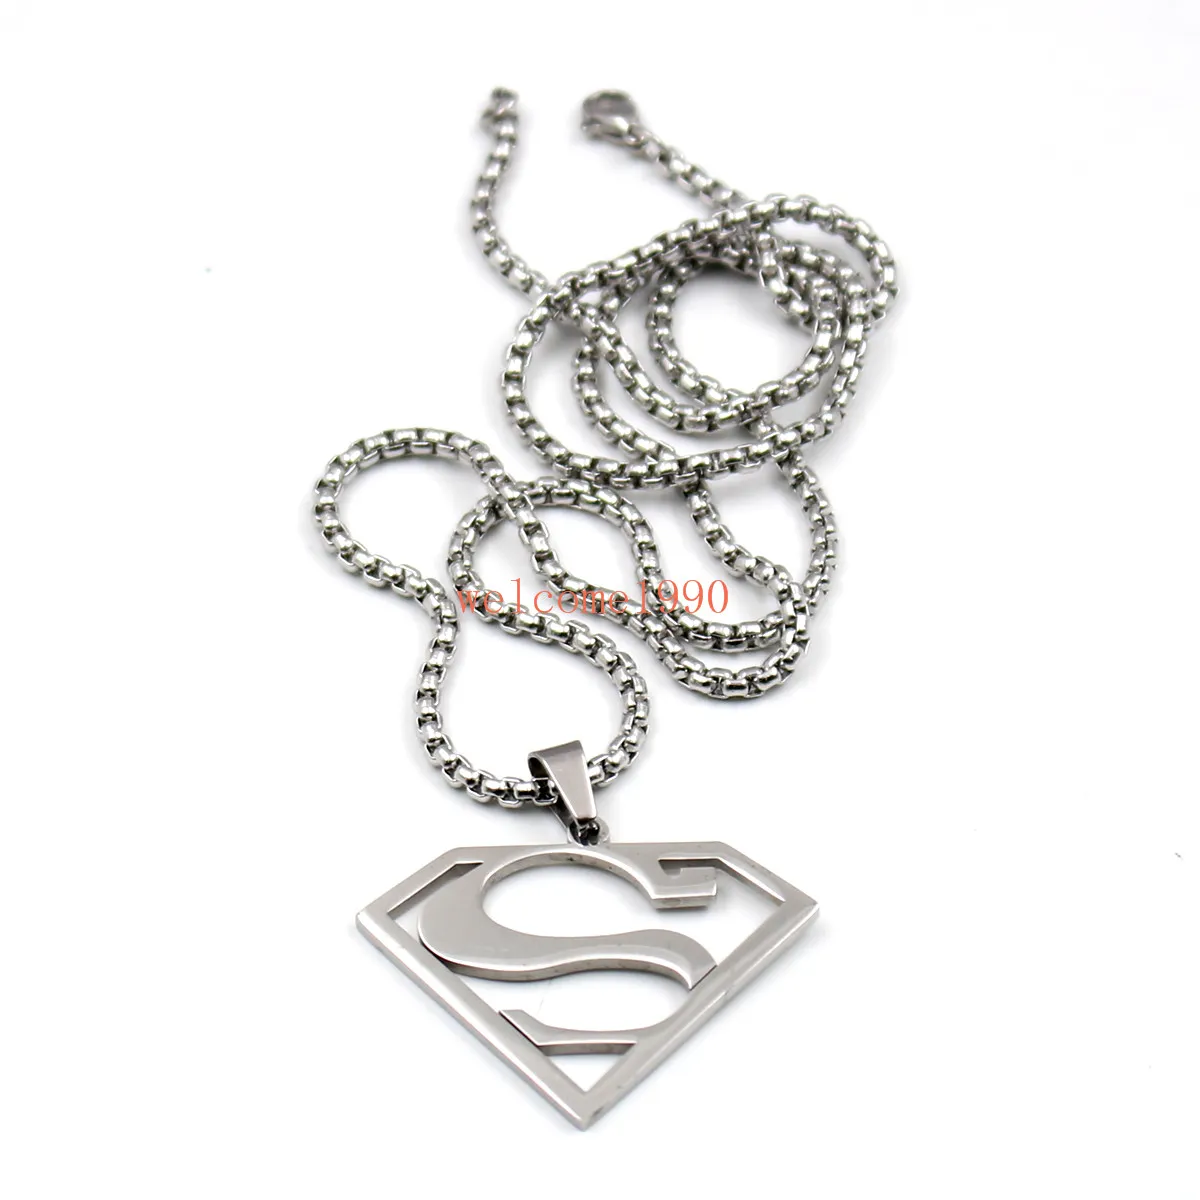 Gold silver black Stainless Steel 15 inch Superman logo Pendant Men039s Gifts Fashion Rolo chain necklace 24 inch lenght7419166